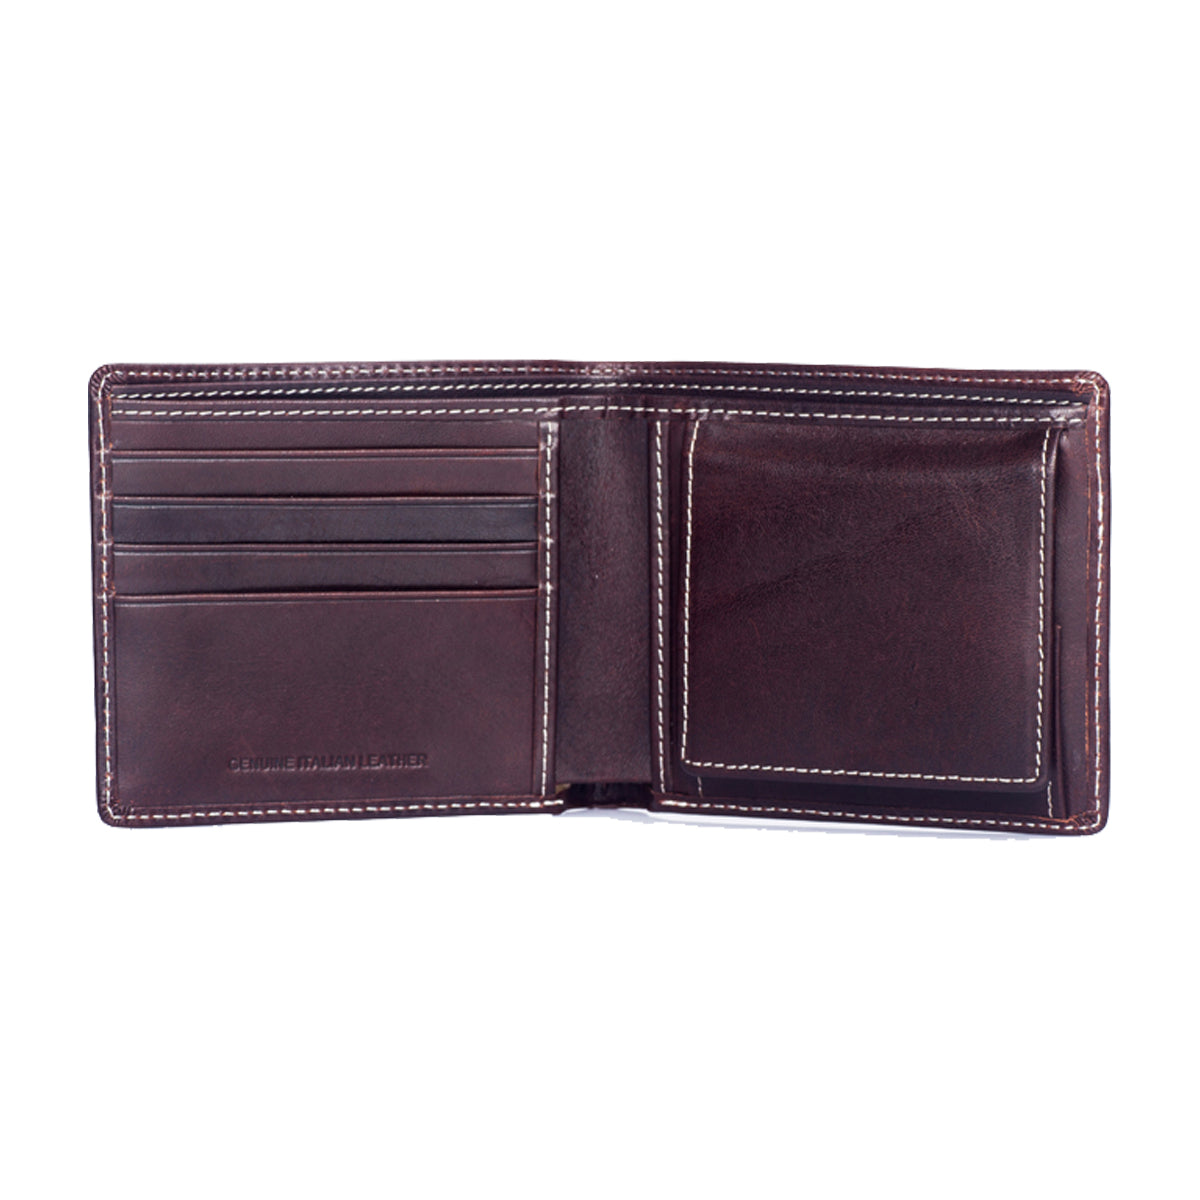 EnzoDesign Brown Leather Wallet w/ Coin Box